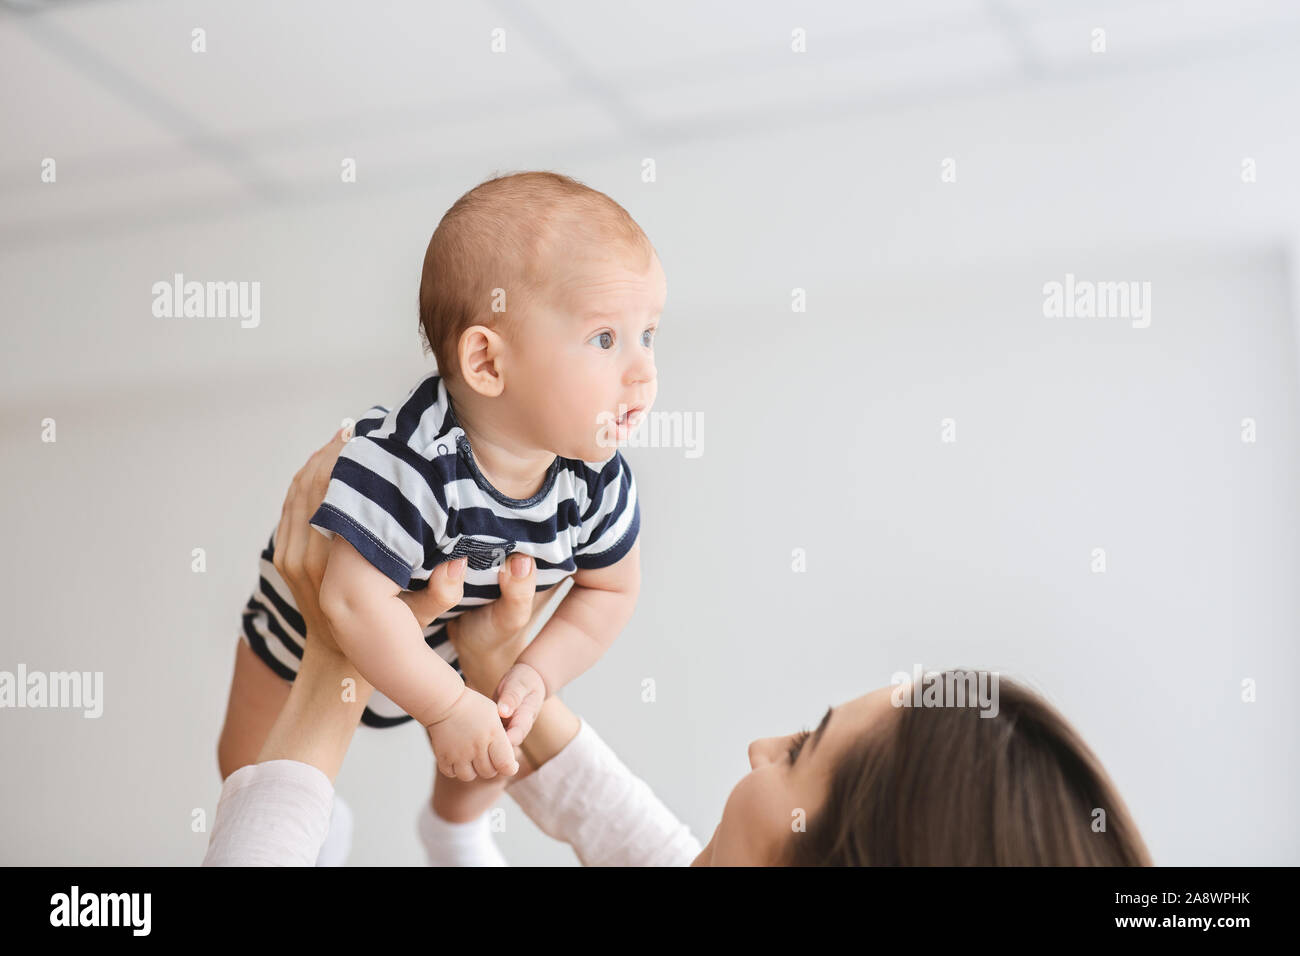 Loving mother lifting adorable newborn baby in air Stock Photo